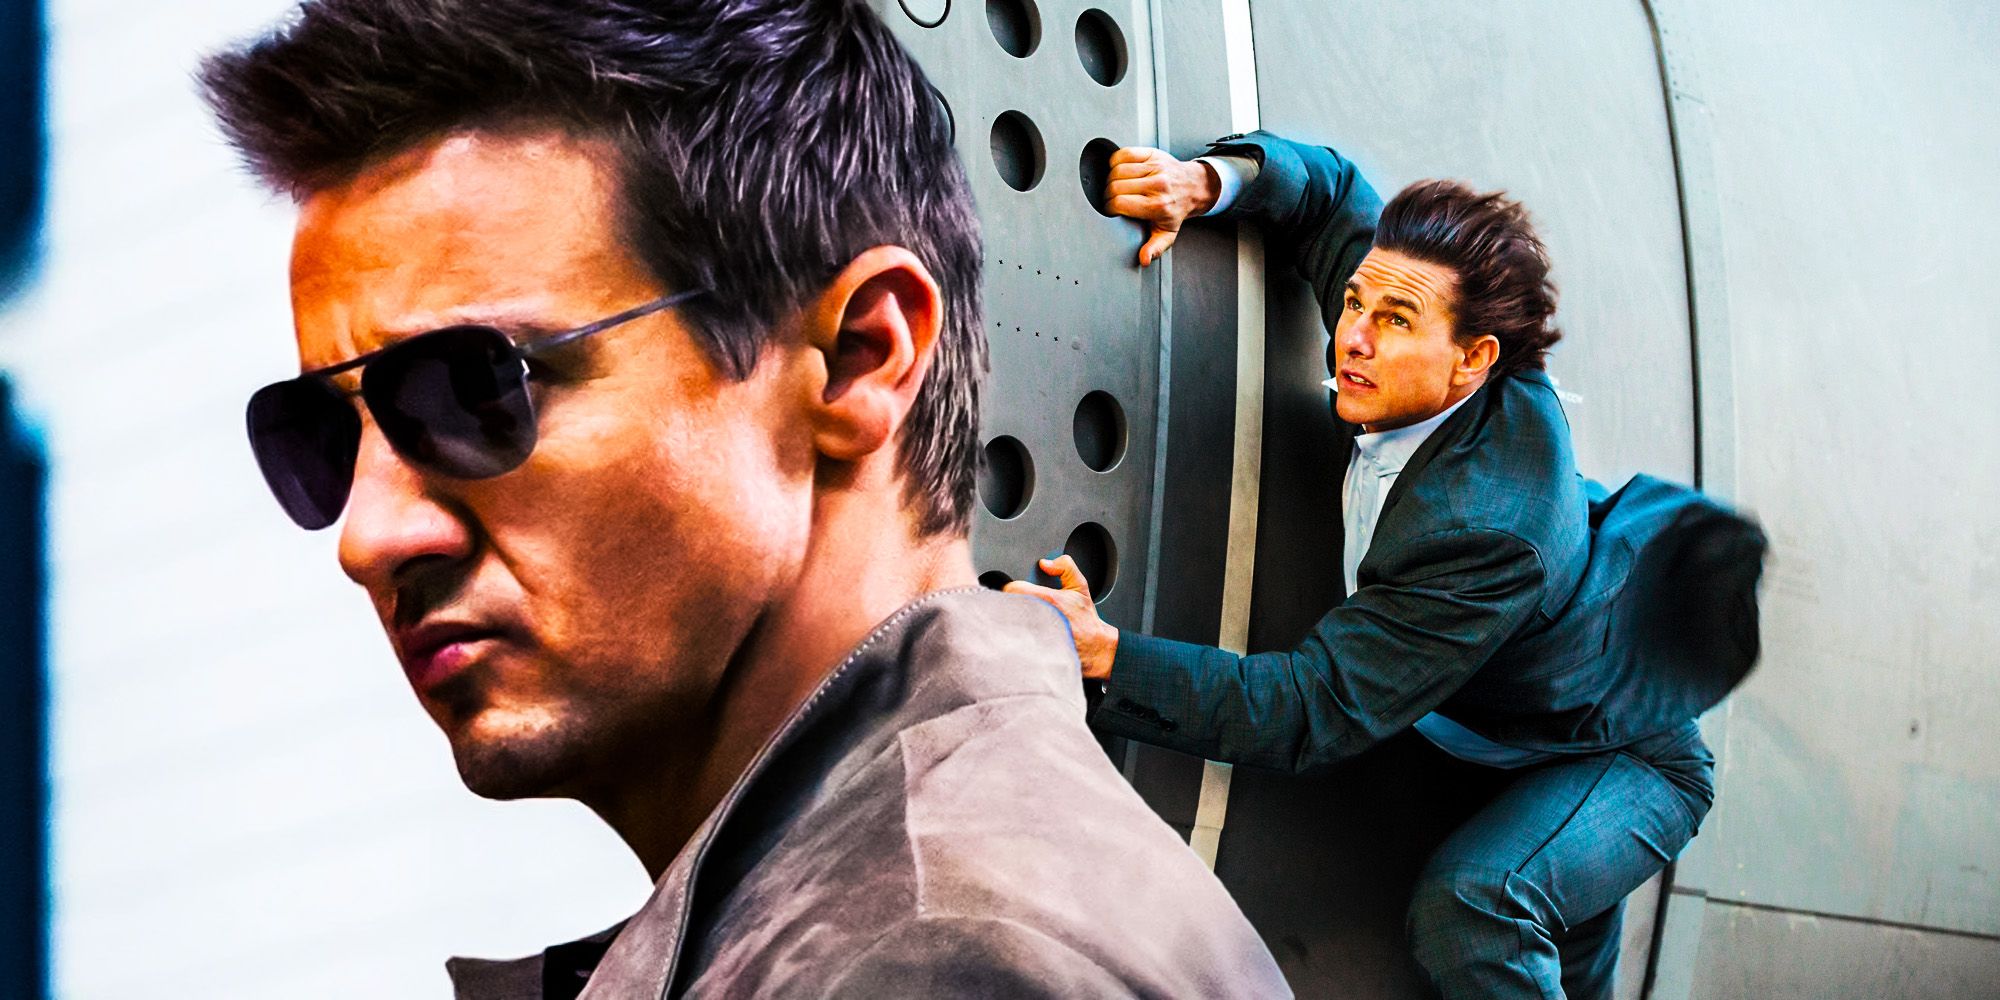 Tom Cruise as Ethan Hunt and Jeremy Renner as Willaim Brandt in Mission Impossib;e